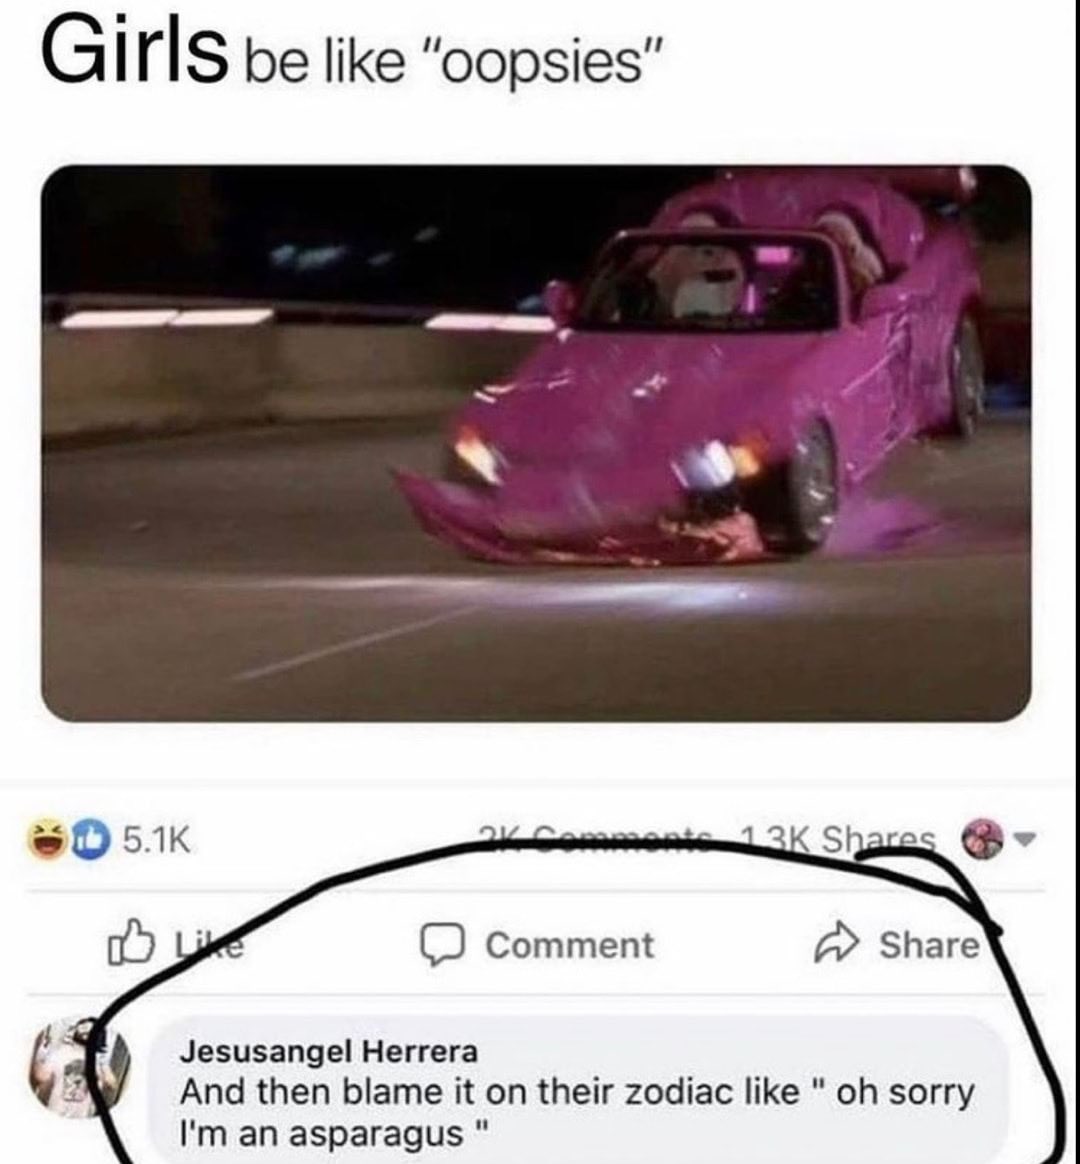 internet hall of  fame - im such an asparagus - Girls be "oopsies" 21 13K Comment Jesusangel Herrera And then blame it on their zodiac " oh sorry I'm an asparagus "